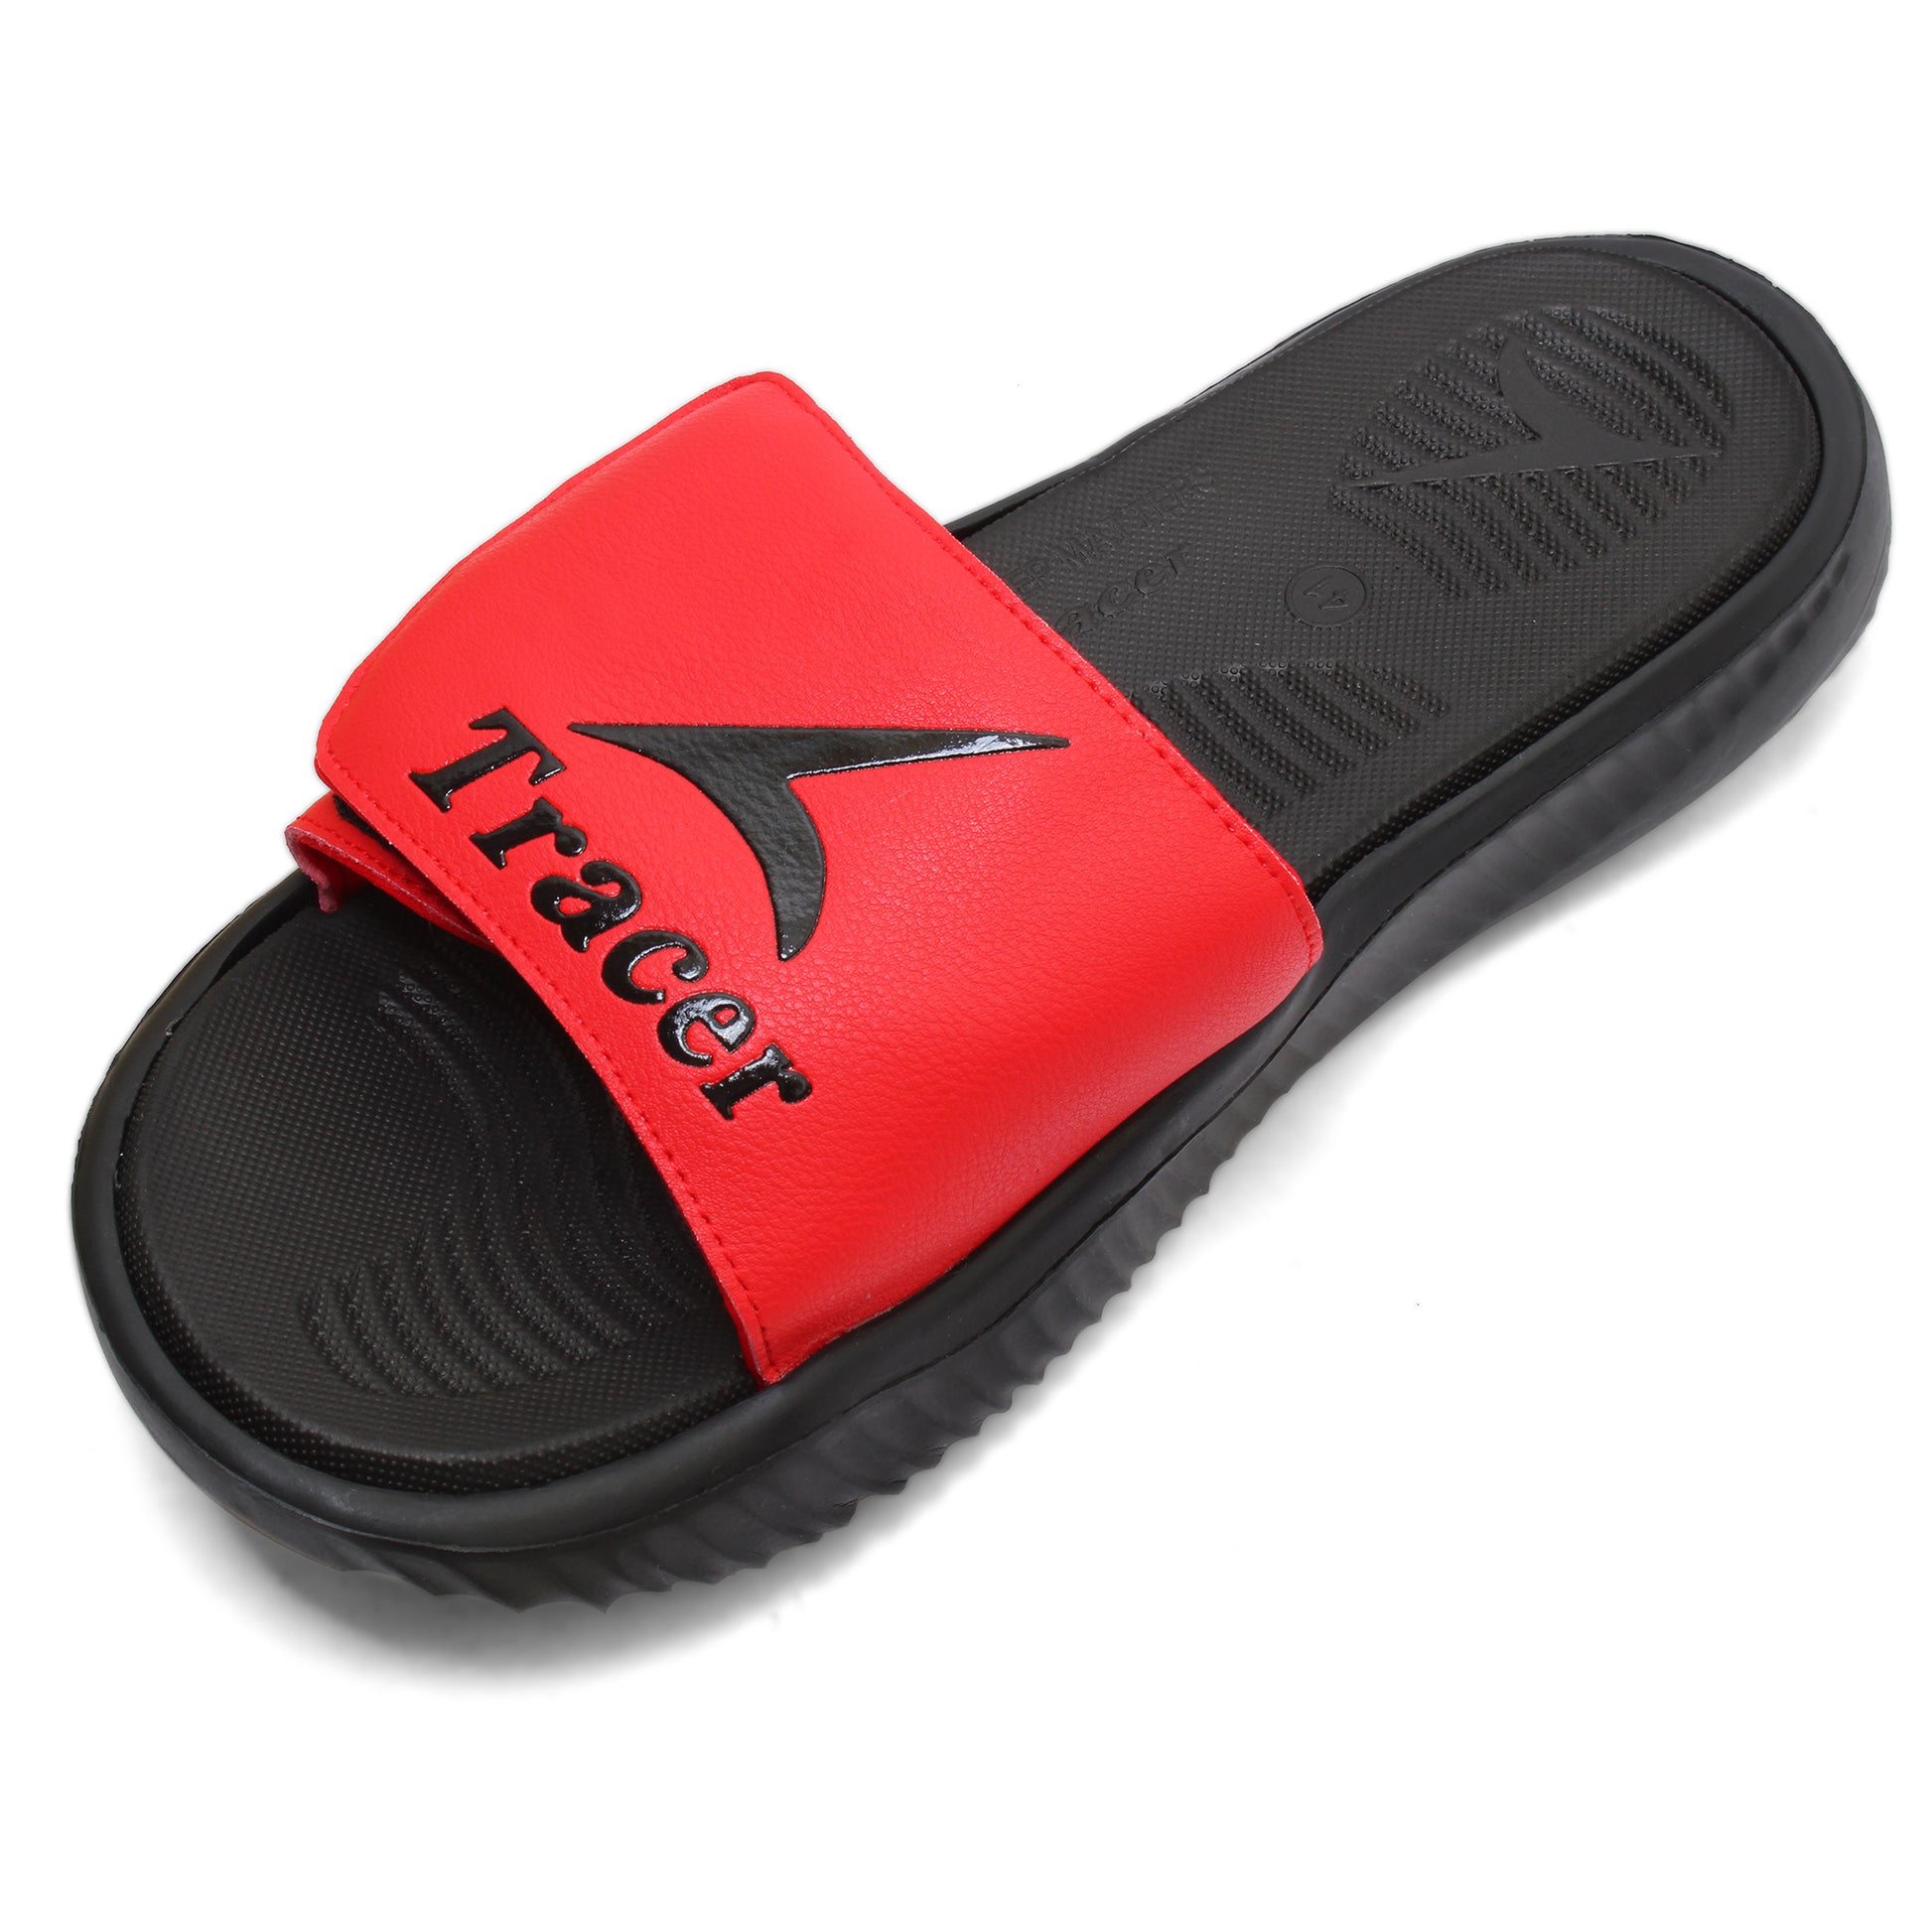 Flat Slippers For Men's Red